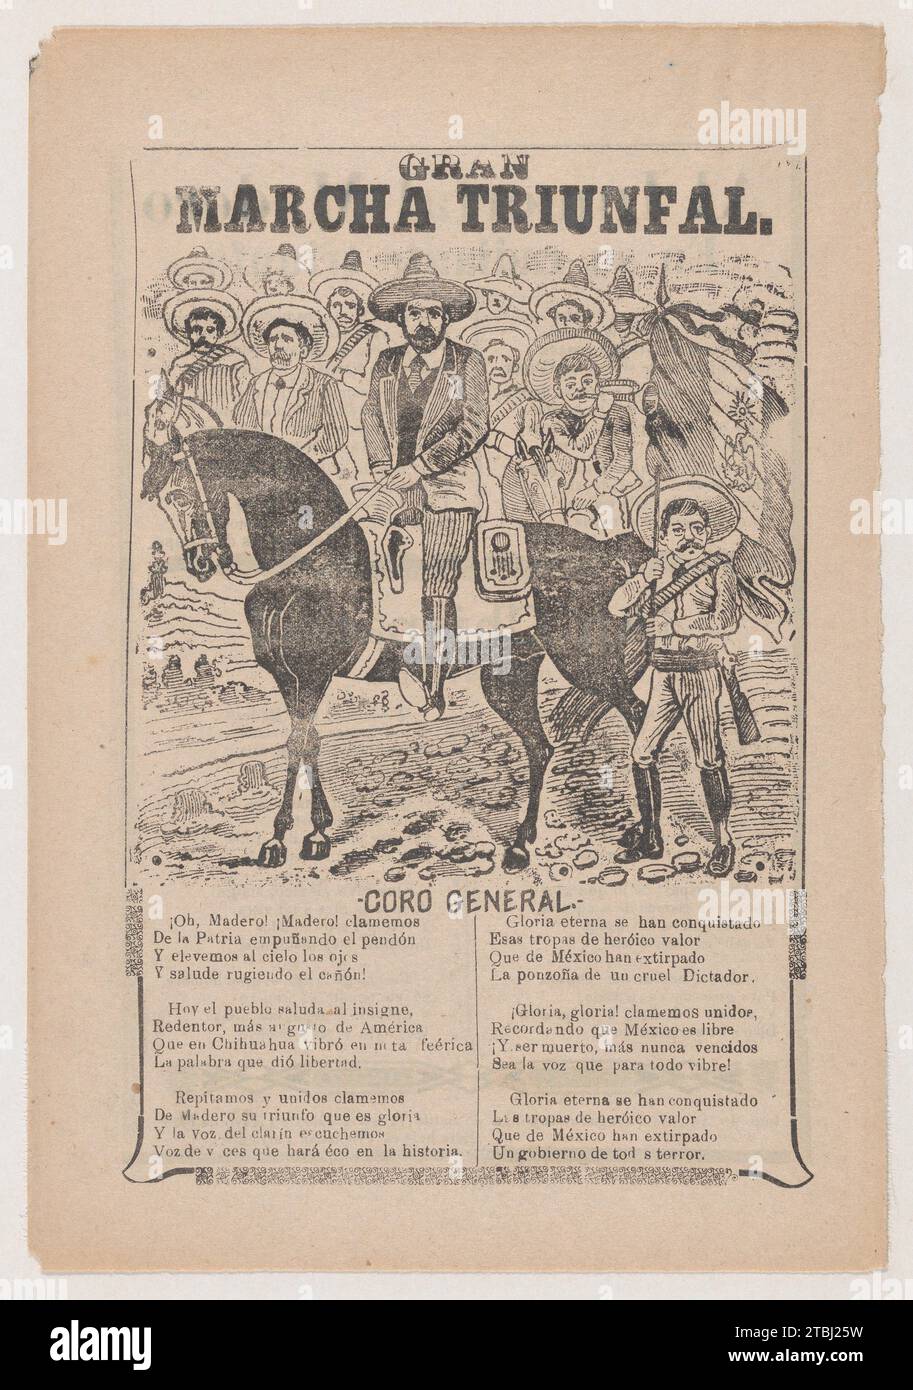 Broadsheet relating to the triumphal march of Francisco Madero, a corrida (ballad) in the bottom section 1946 by Antonio Vanegas Arroyo Stock Photo